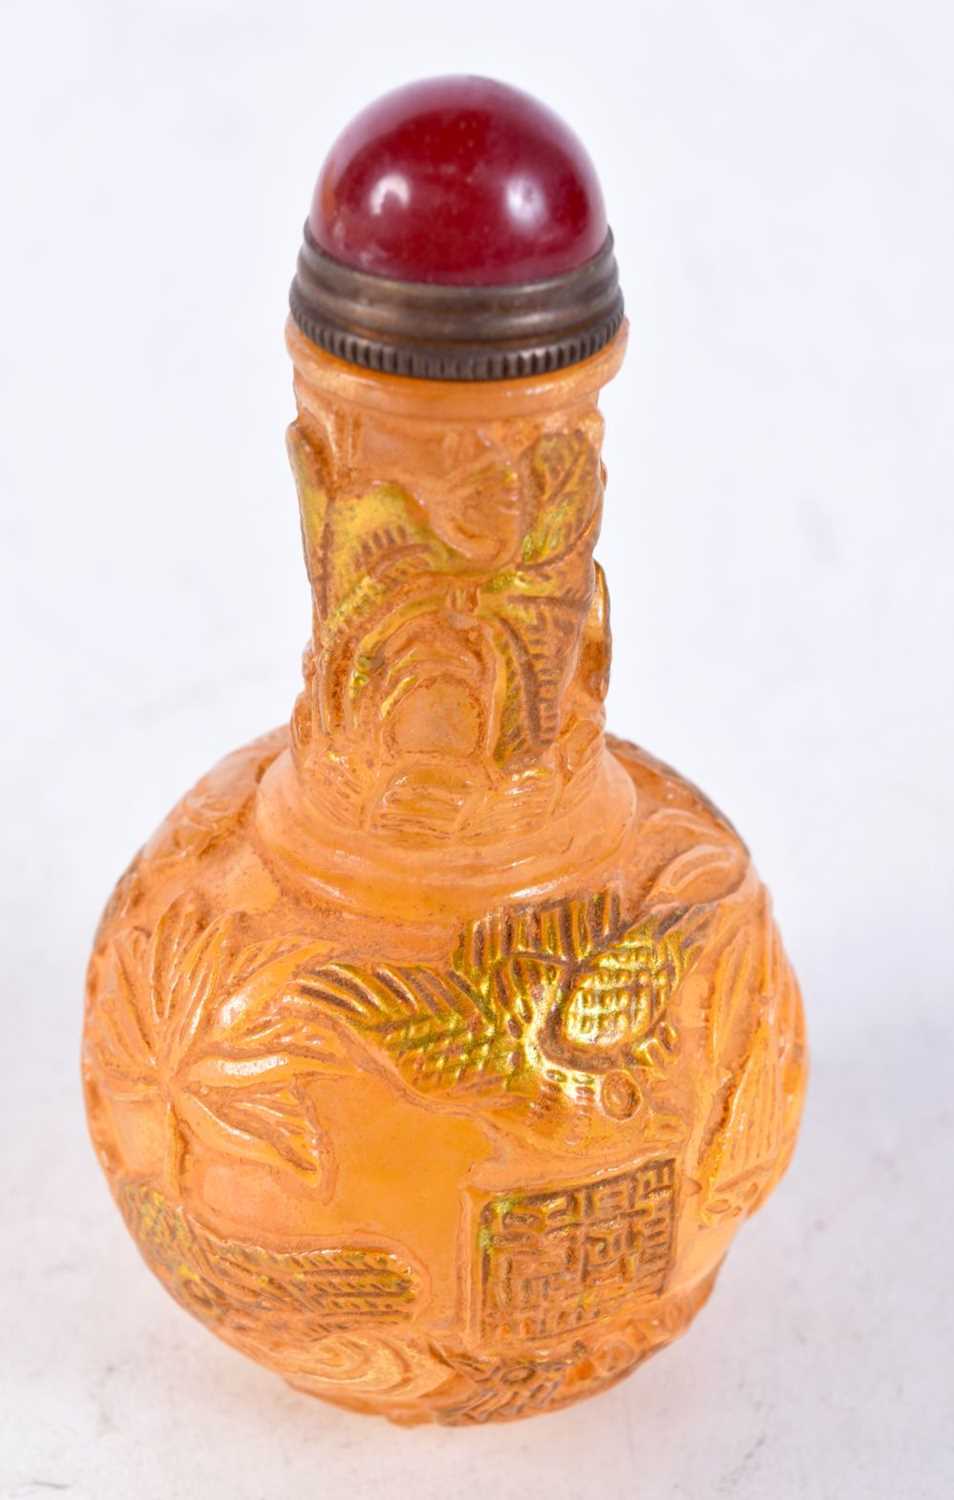 A PEKING GLASS SNUFF BOTTLE WITH A HARDSTONE STOPPER. 8.6cm x 4.4cm - Image 2 of 3